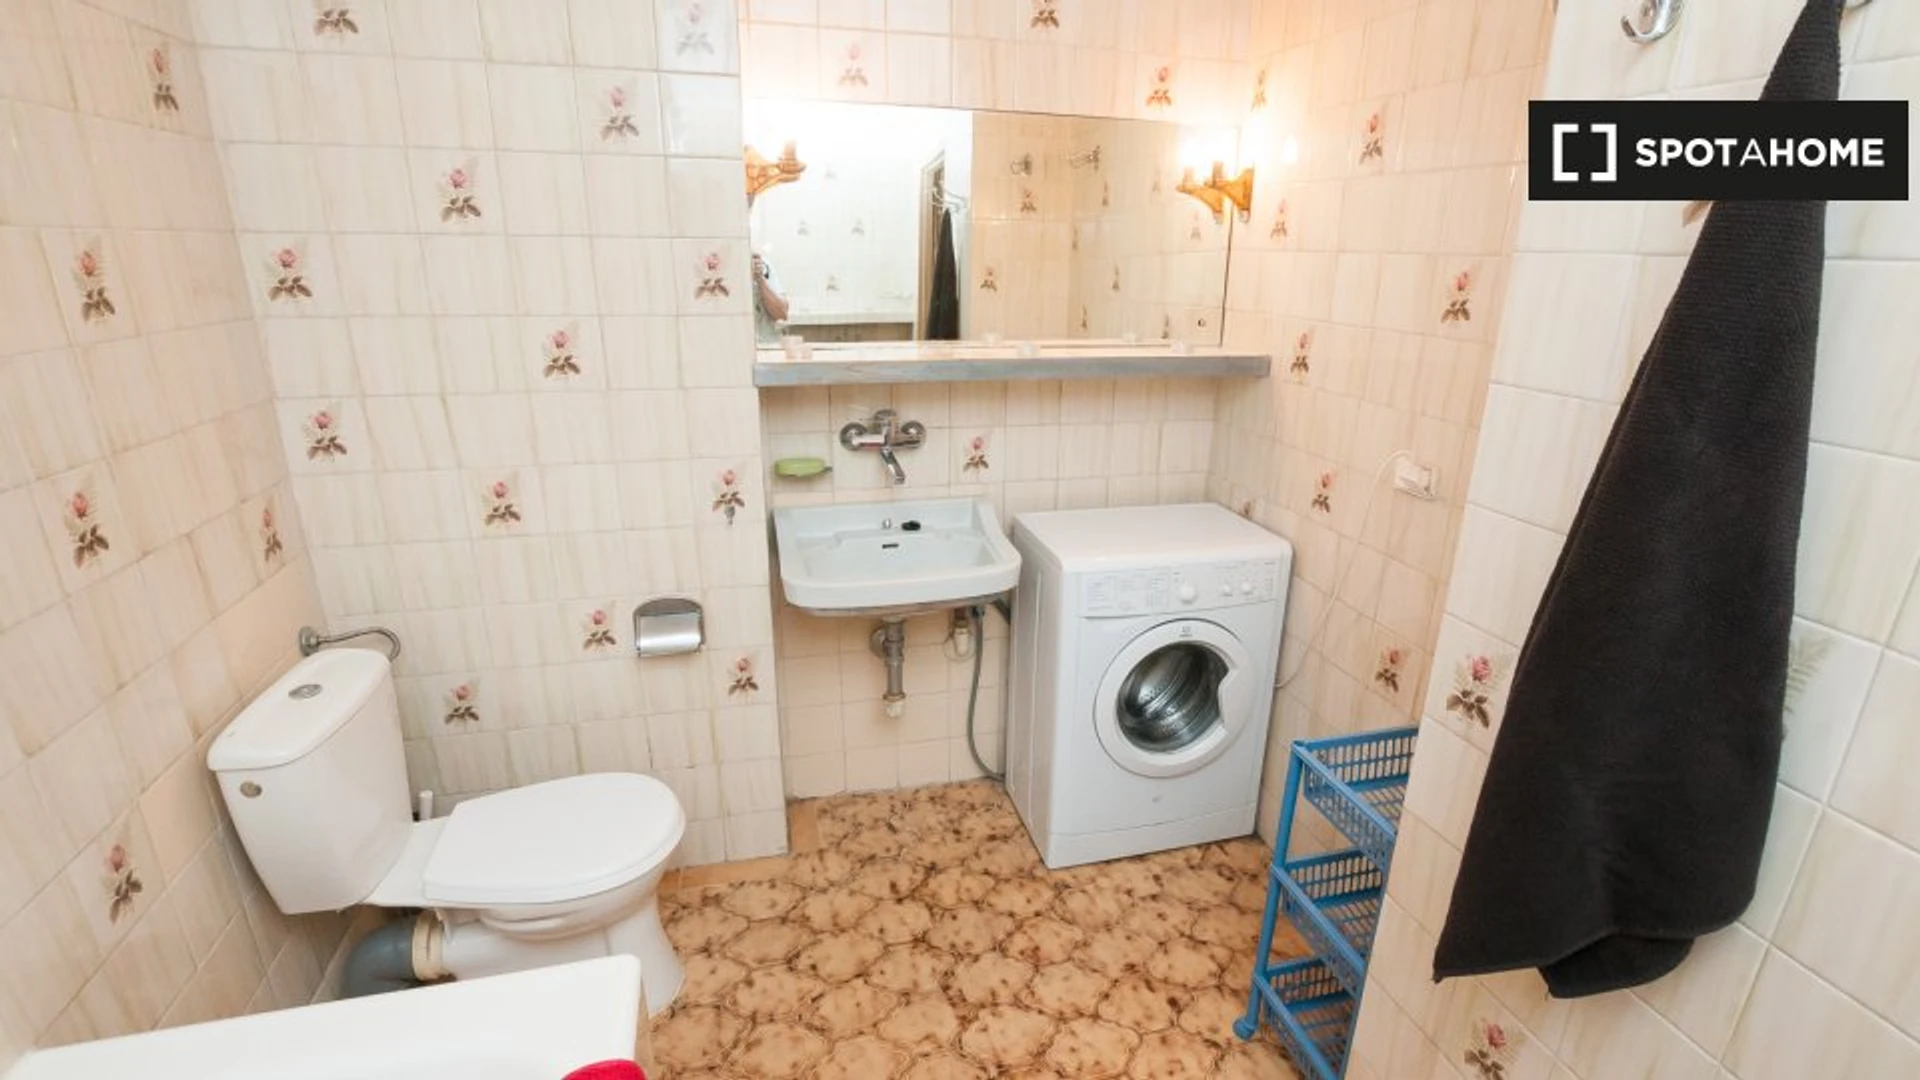 Room for rent in a shared flat in Warsaw